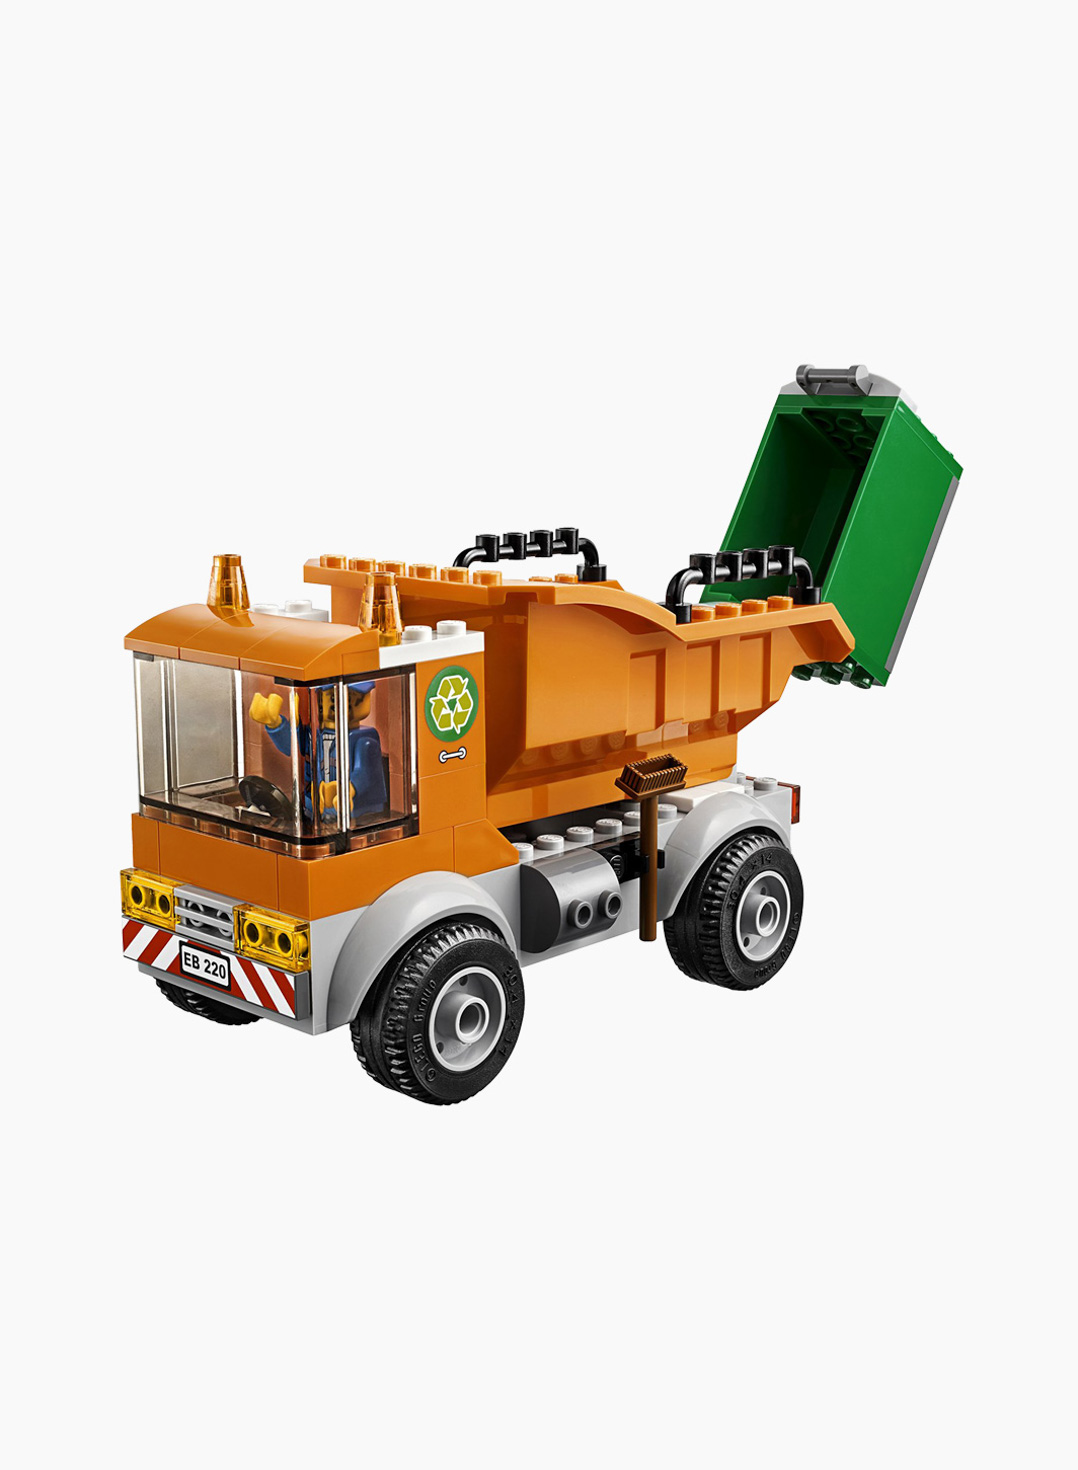 Lego City Constructor Garbage Truck